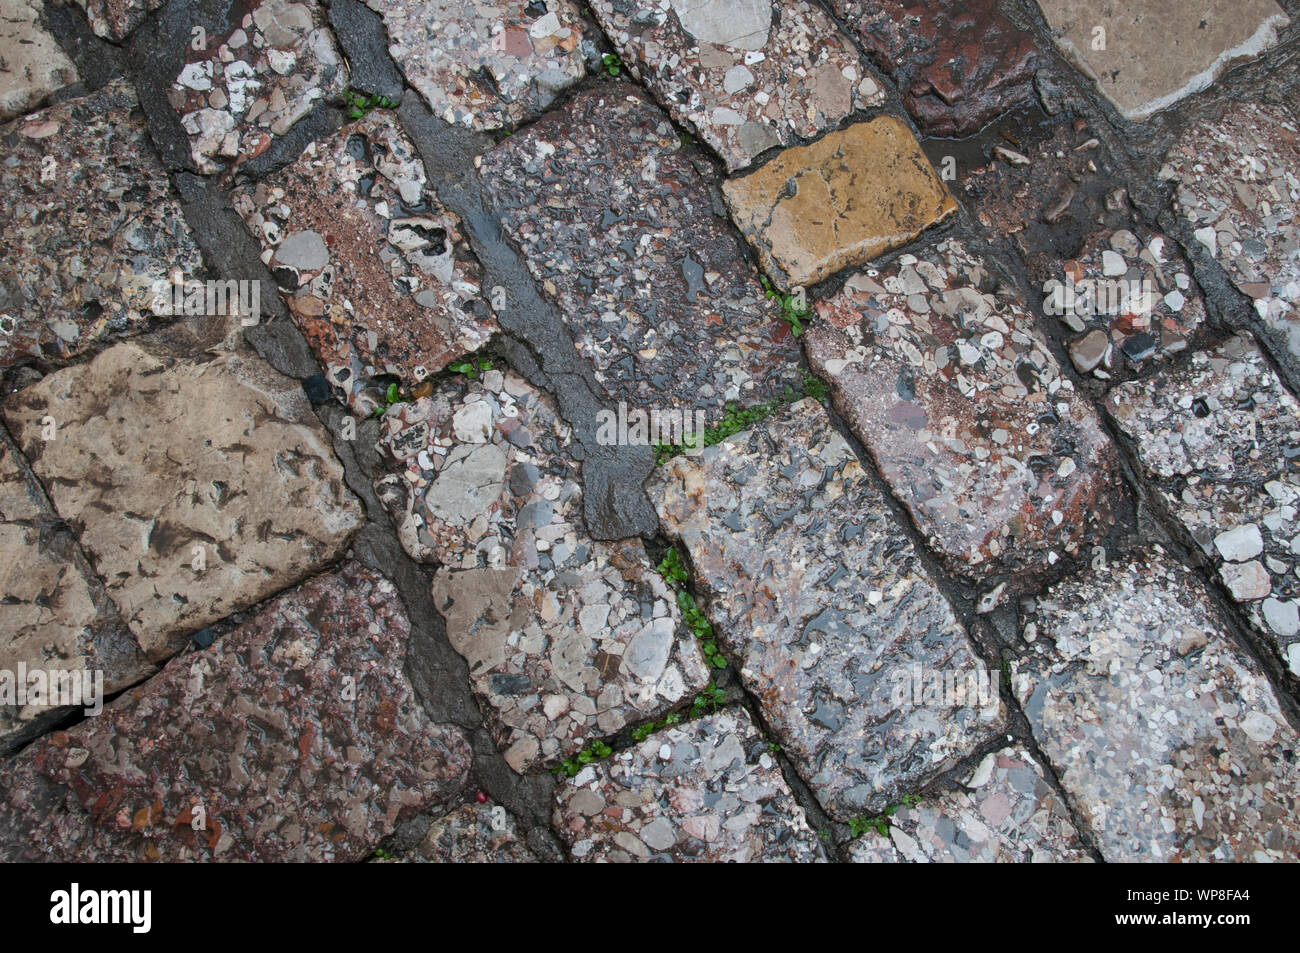 Paving stones of a town square in the Old Quarter of Lijiang, Yunnan, China Stock Photo